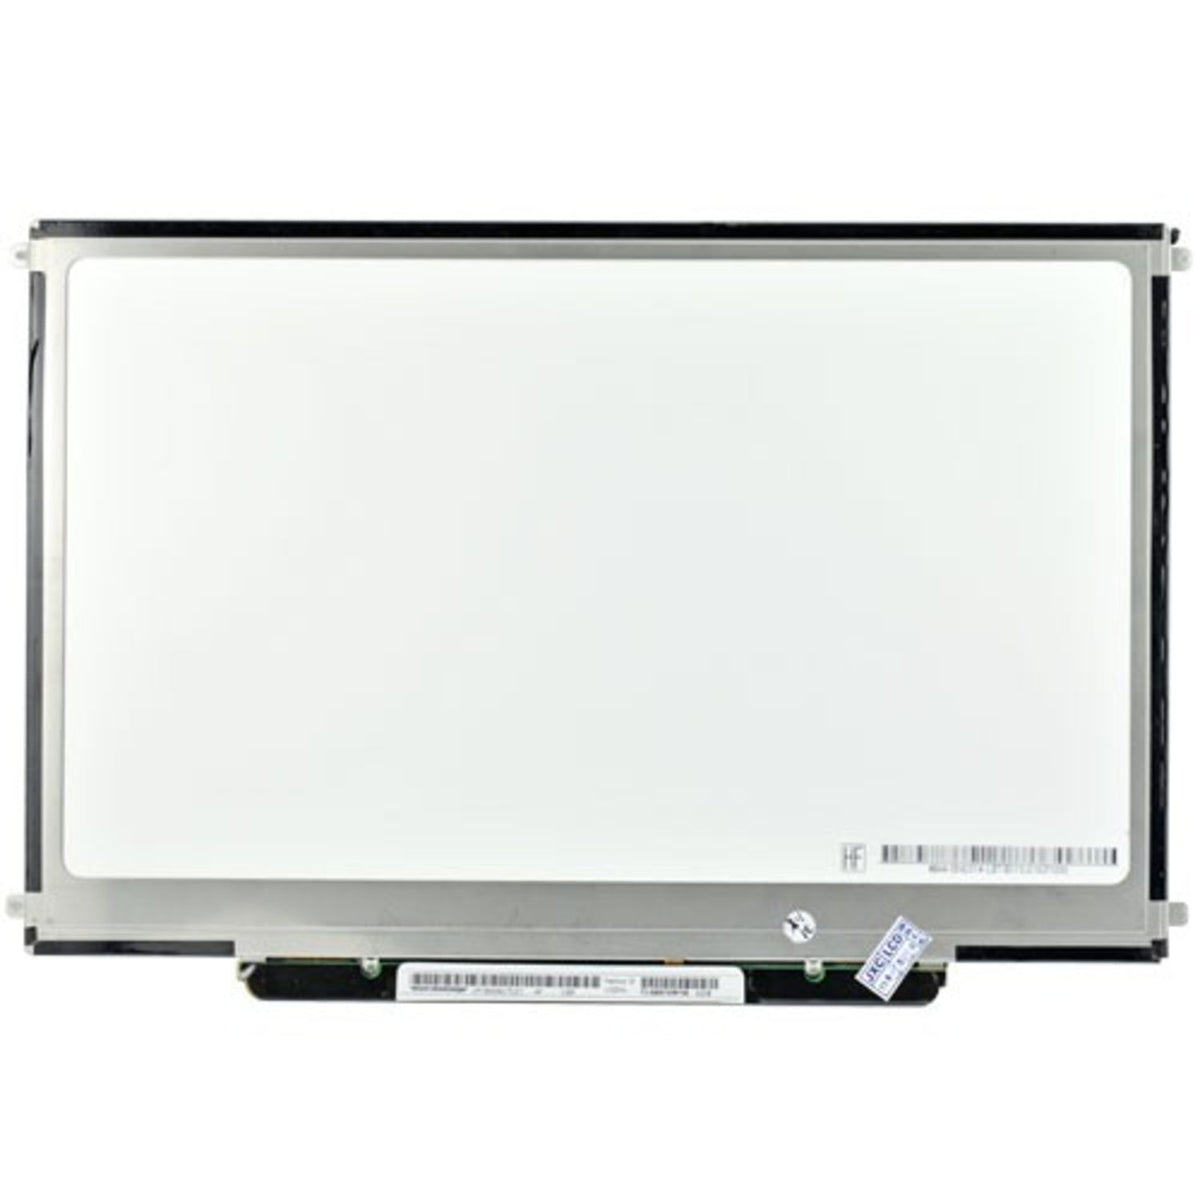 New & Genuine LCD Screen of A1278 For Apple MacBook Unibody LP133WX2-TLC1 13" LATE 2008-MID 2012